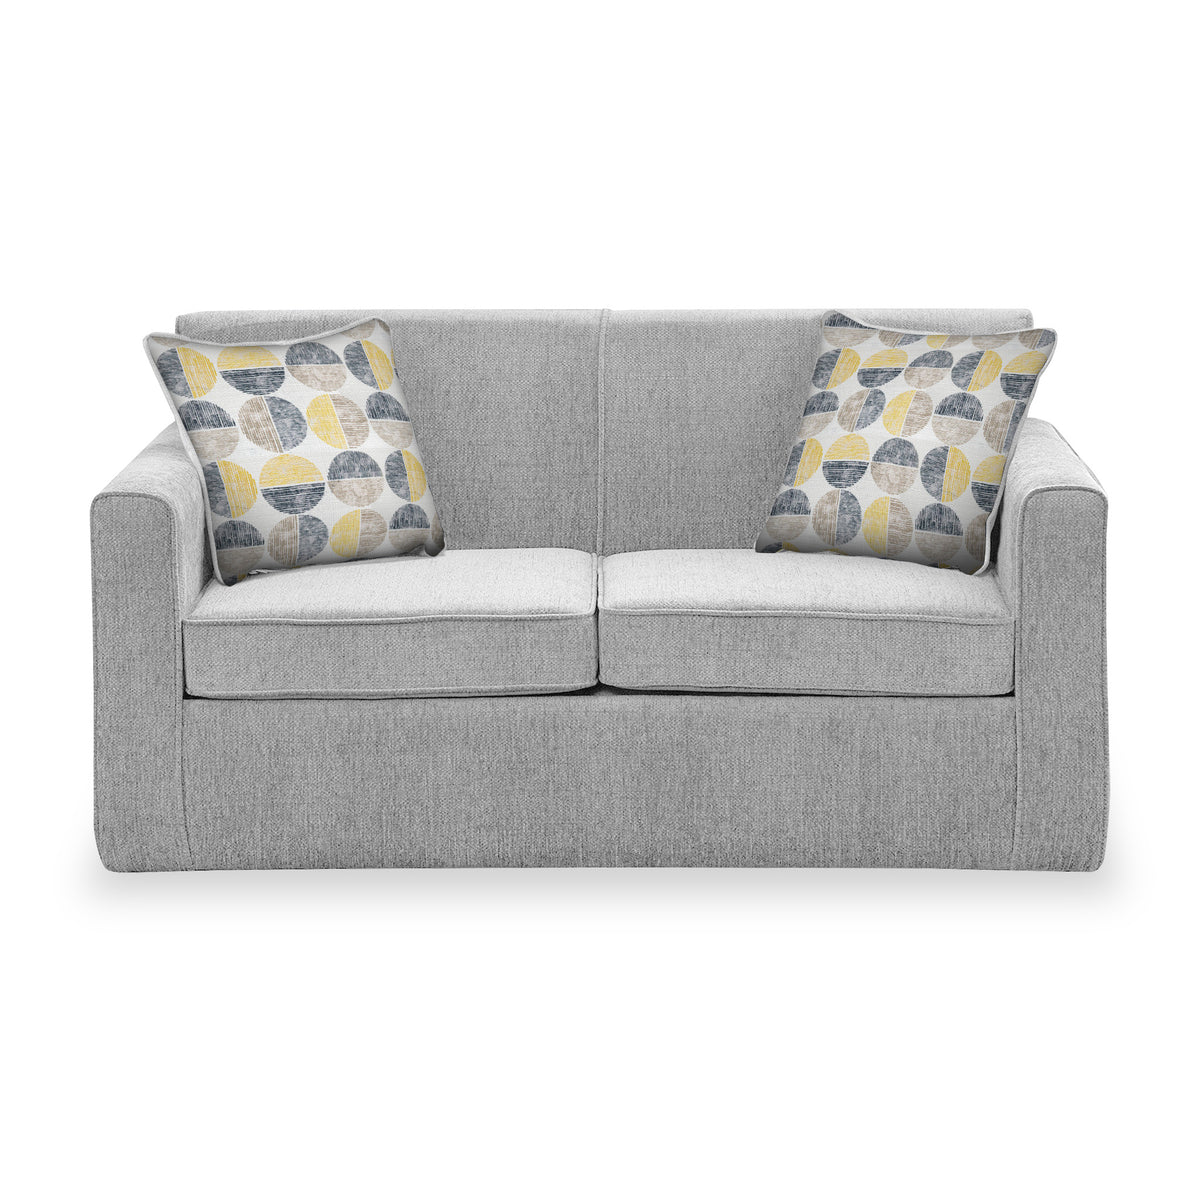 Bawtry Silver Faux Linen 2 Seater Sofabed with Beige Scatter Cushions from Roseland Furniture